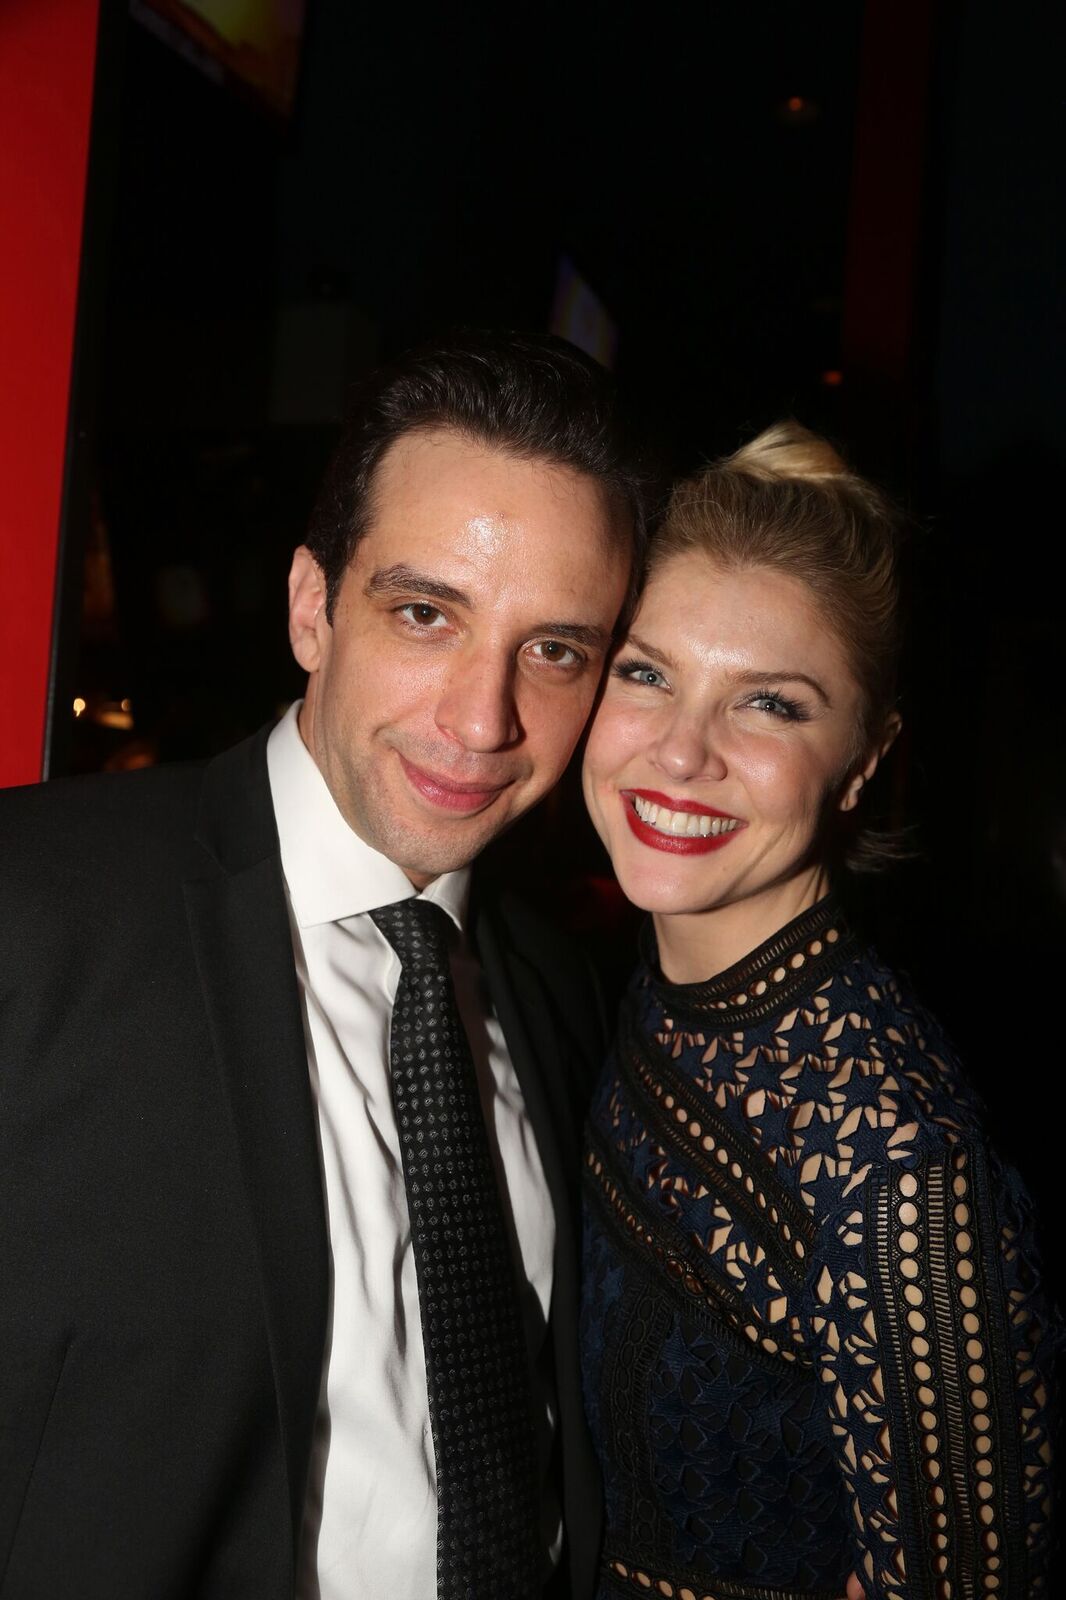 Nick Cordero and Amanda Kloots at the after-party for the Broadway Series "Crazy For You" on February 19, 2017, in New York City | Photo: Bruce Glikas/FilmMagic/Getty Images